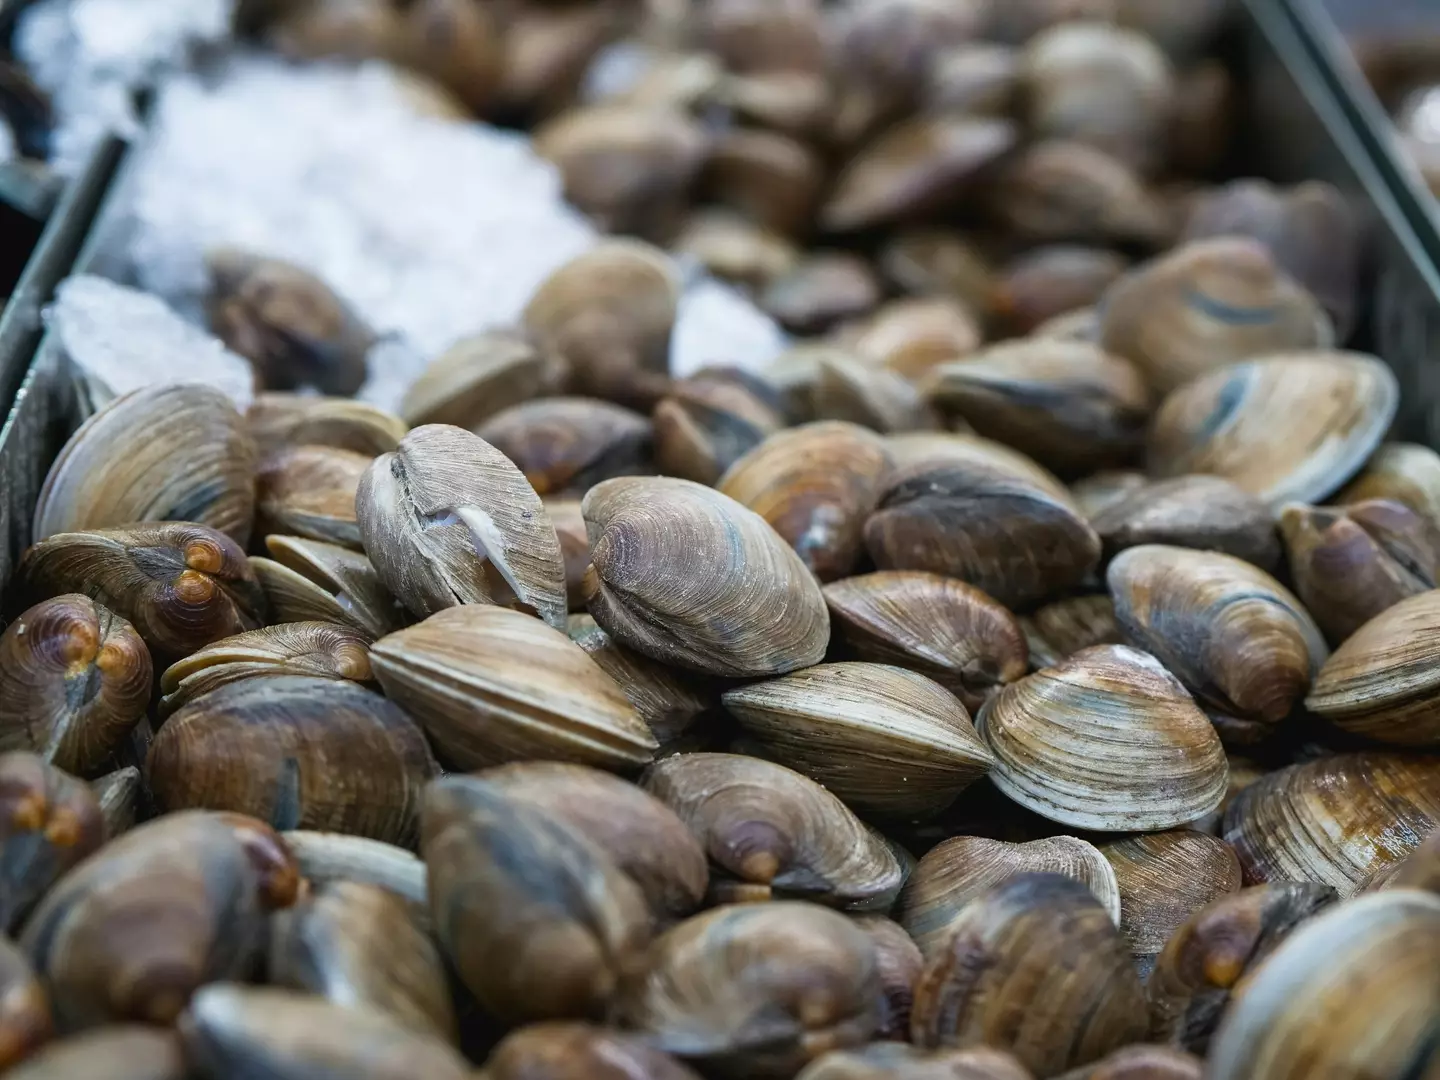 Collecting clams is illegal without having a fishing license. (pexels/Kindel Media)